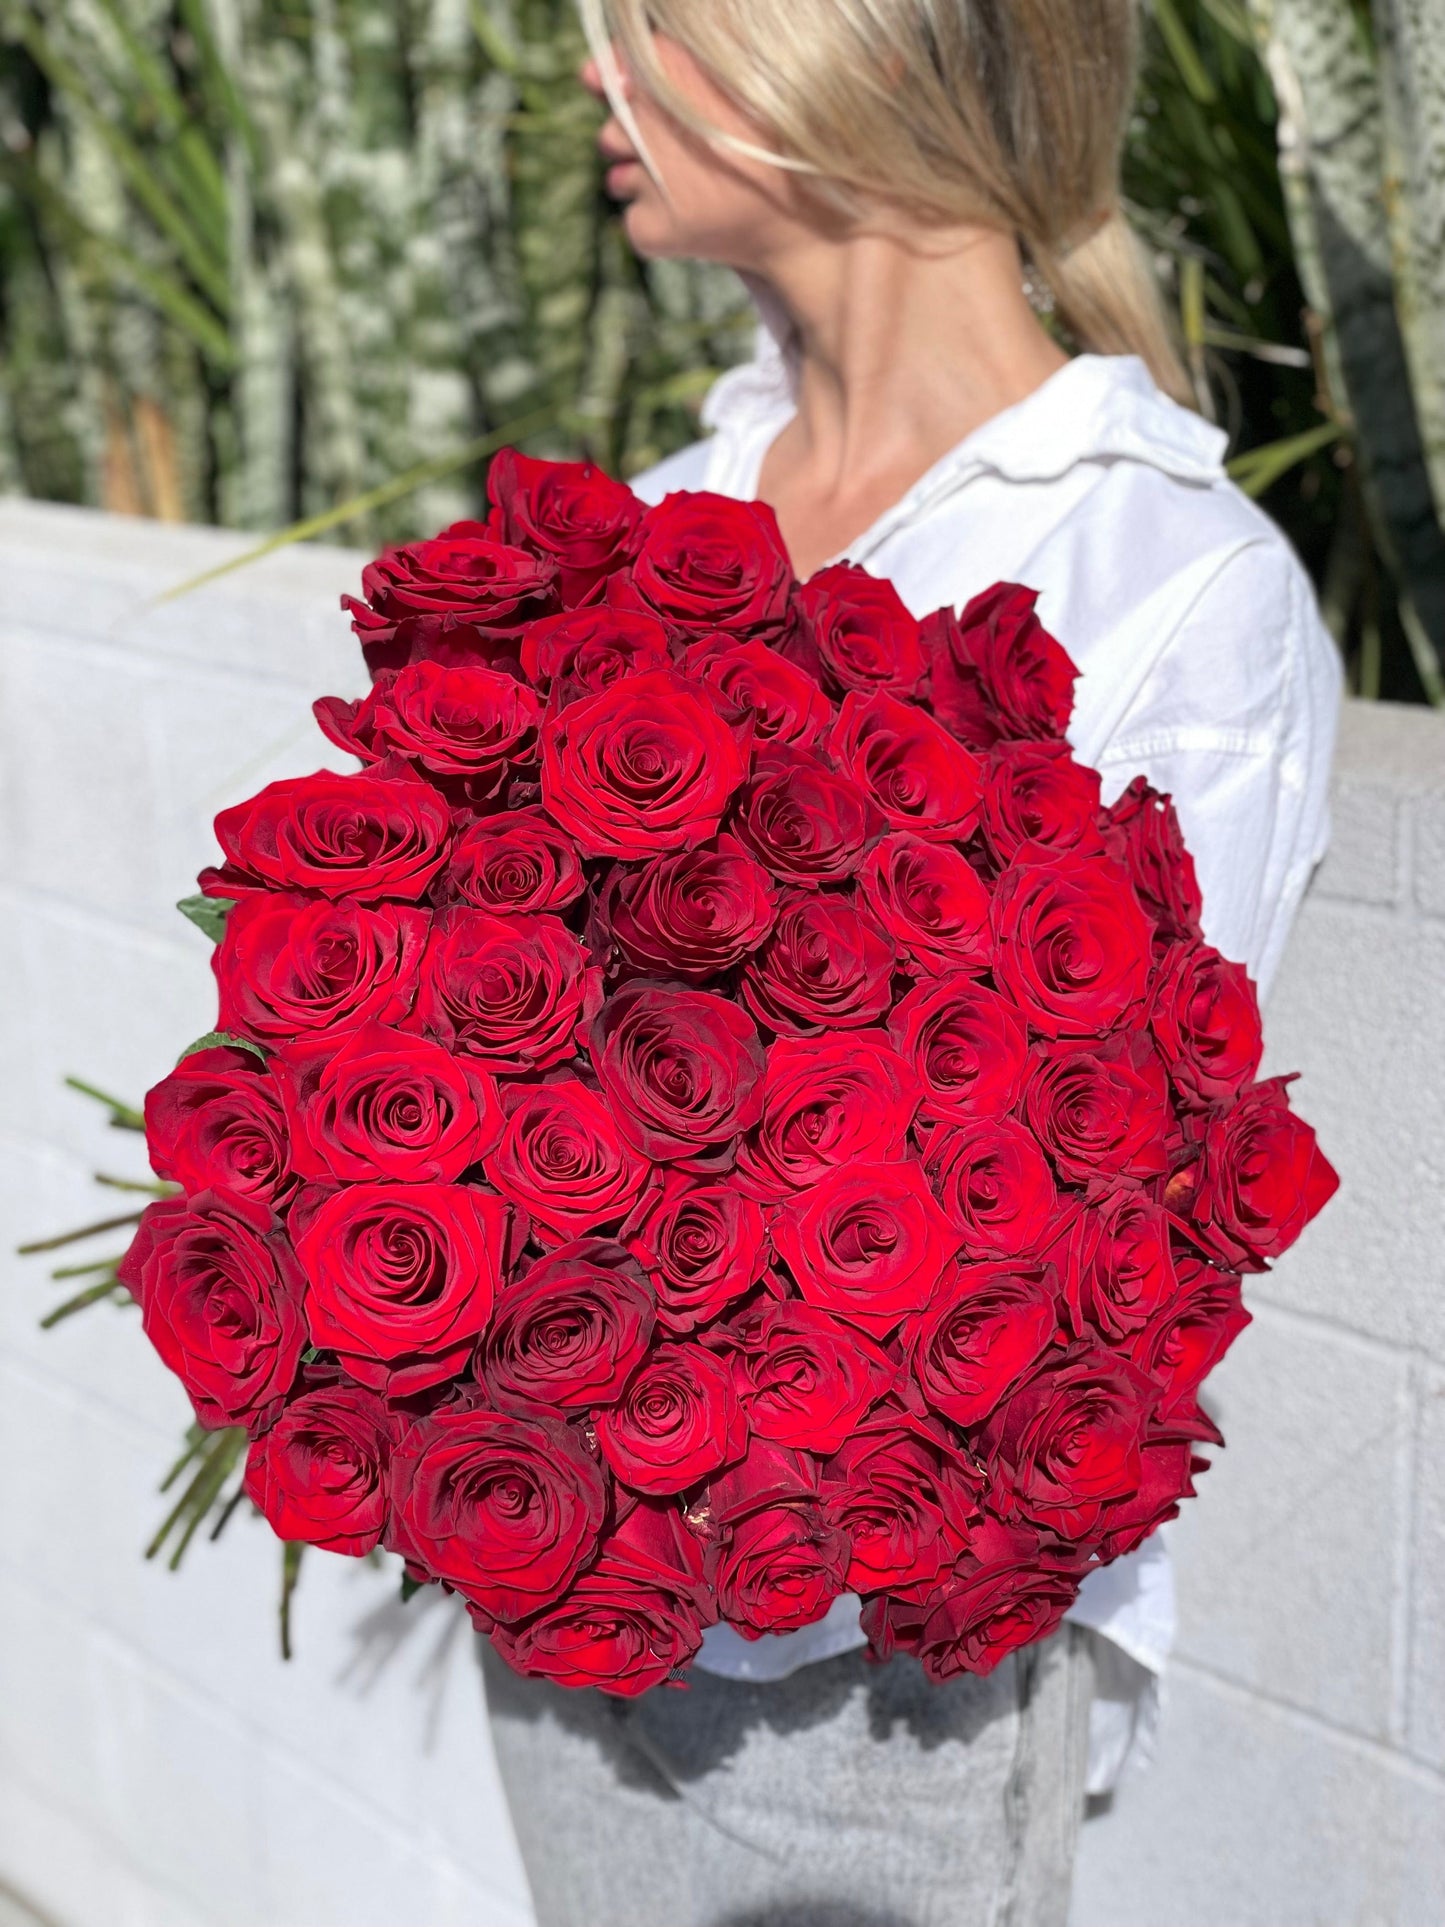 Gorgeous Bouquet of 50 Stunning Red Roses